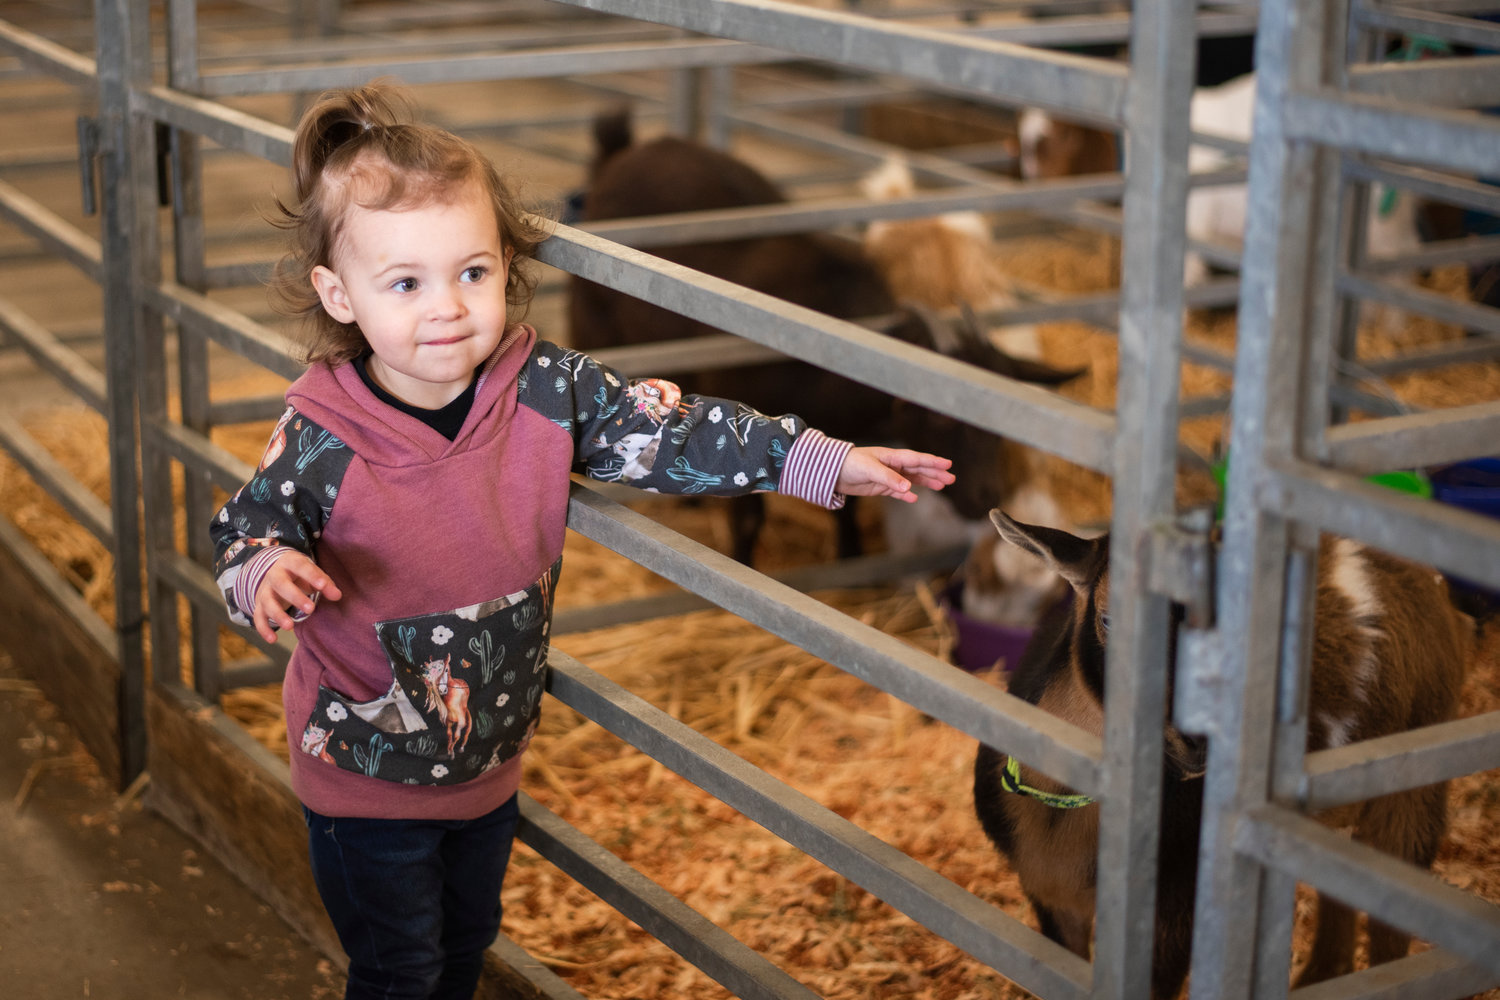 Adalynn, 2, reaches in to pet a goat in its pen inside the Blue Pavilion at the Southwest Washington Fairgrounds on Friday before the opening of the Spring Youth Fair.